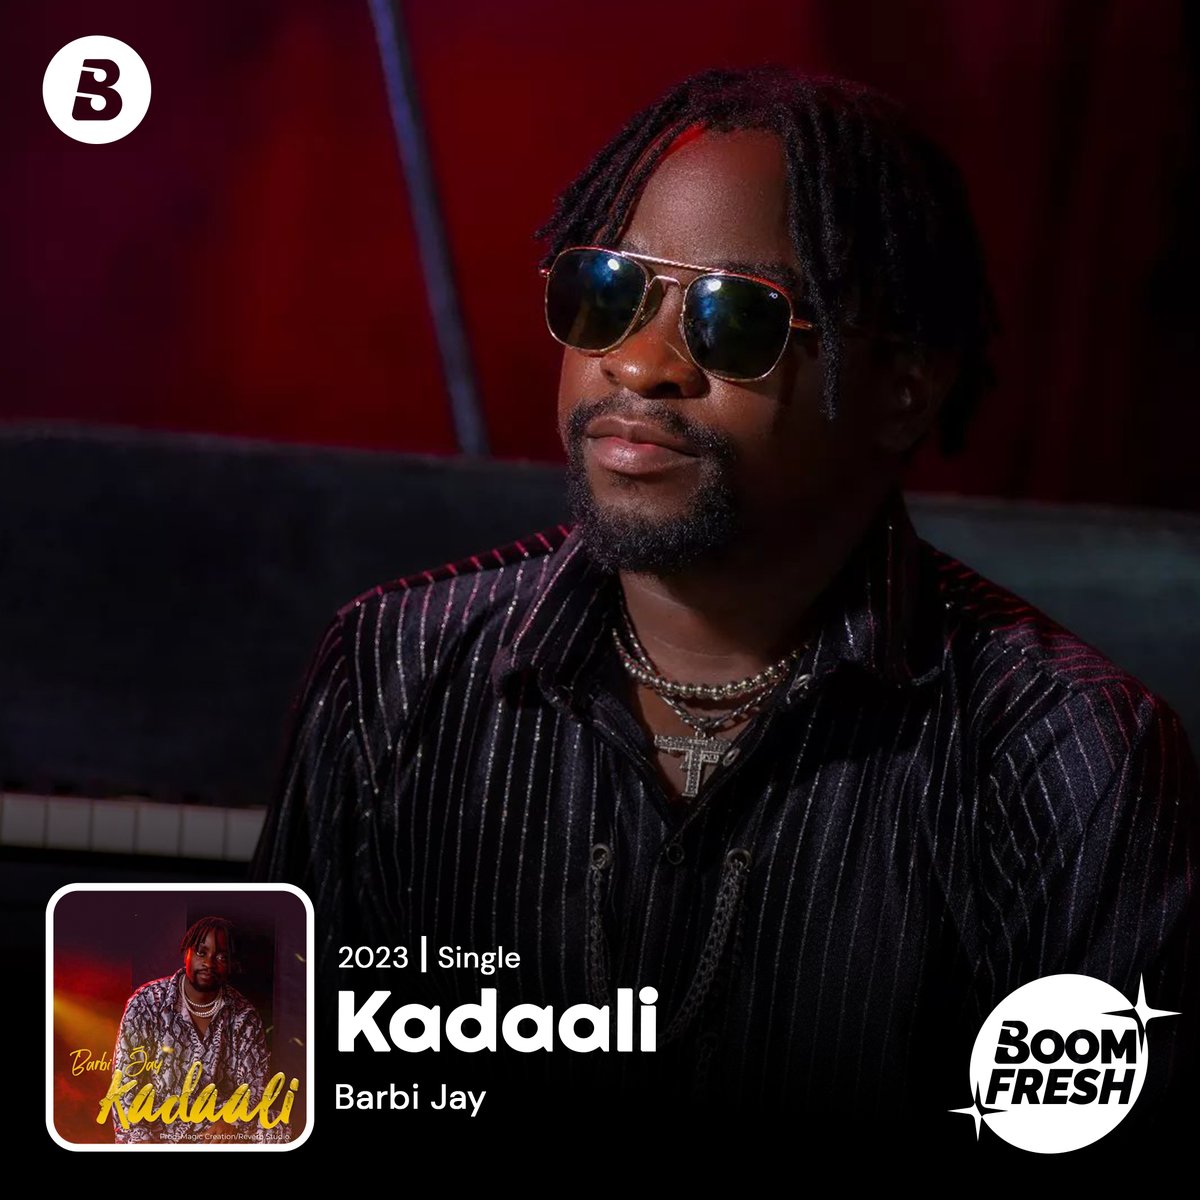 🚨BOOM FRESH🚨 #Kadaali is a fresh one by Barbie Jay Nsolo Nkambwe Check it out on #boomplay